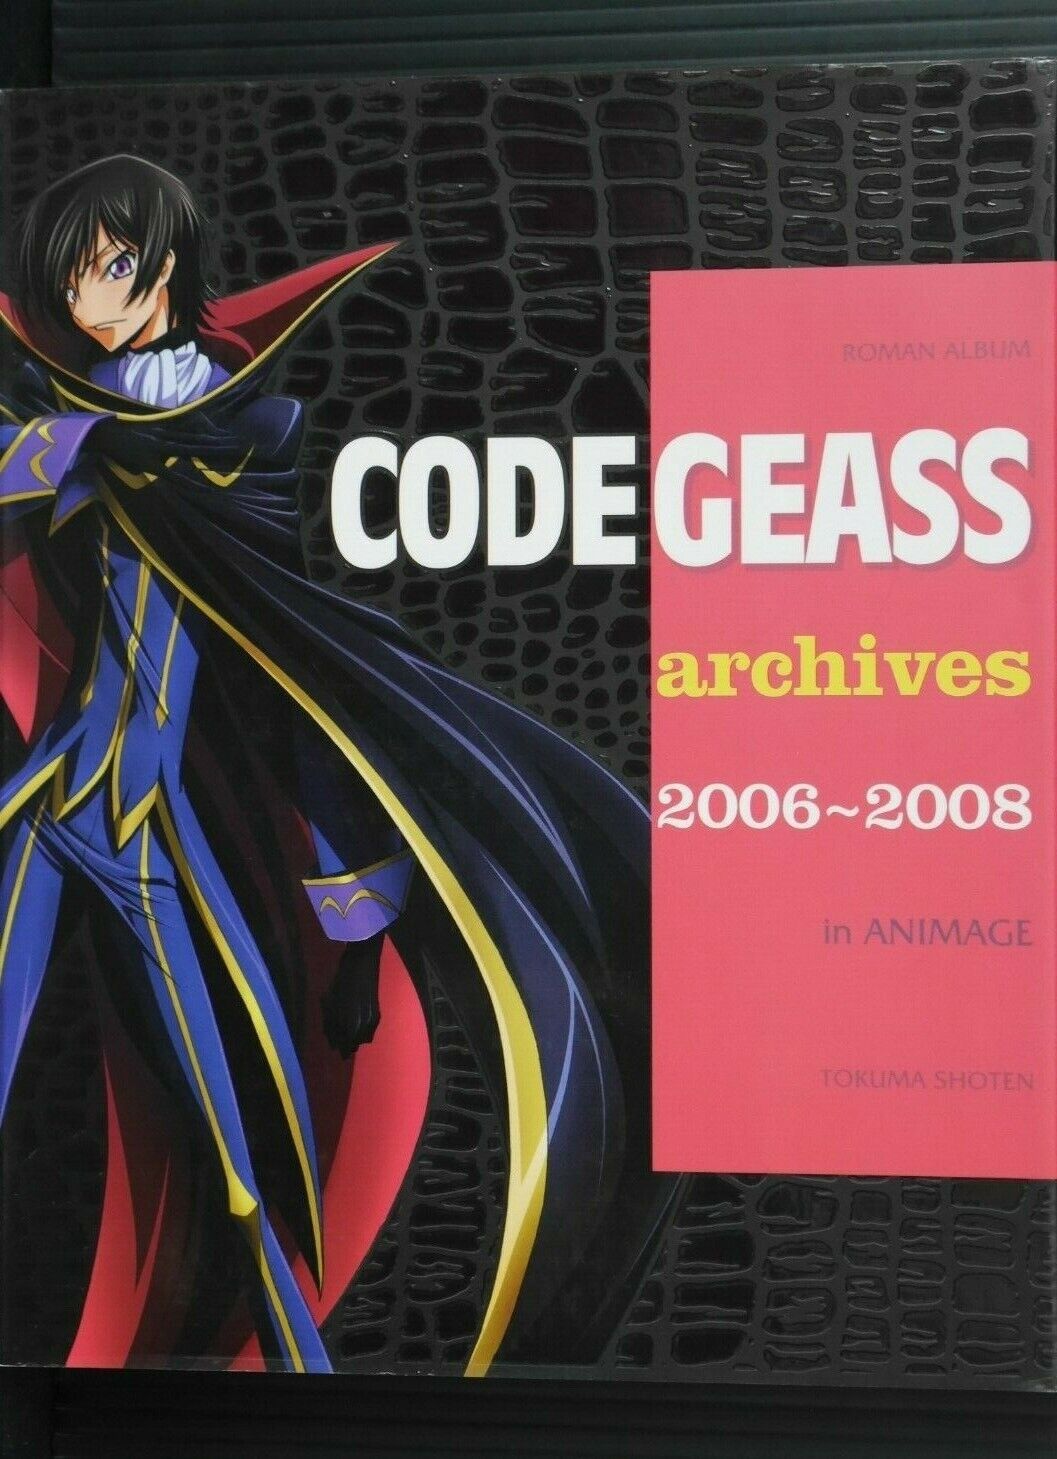 Code Geass archives 2006~2008 in Animage (Art Guide Book) JAPAN